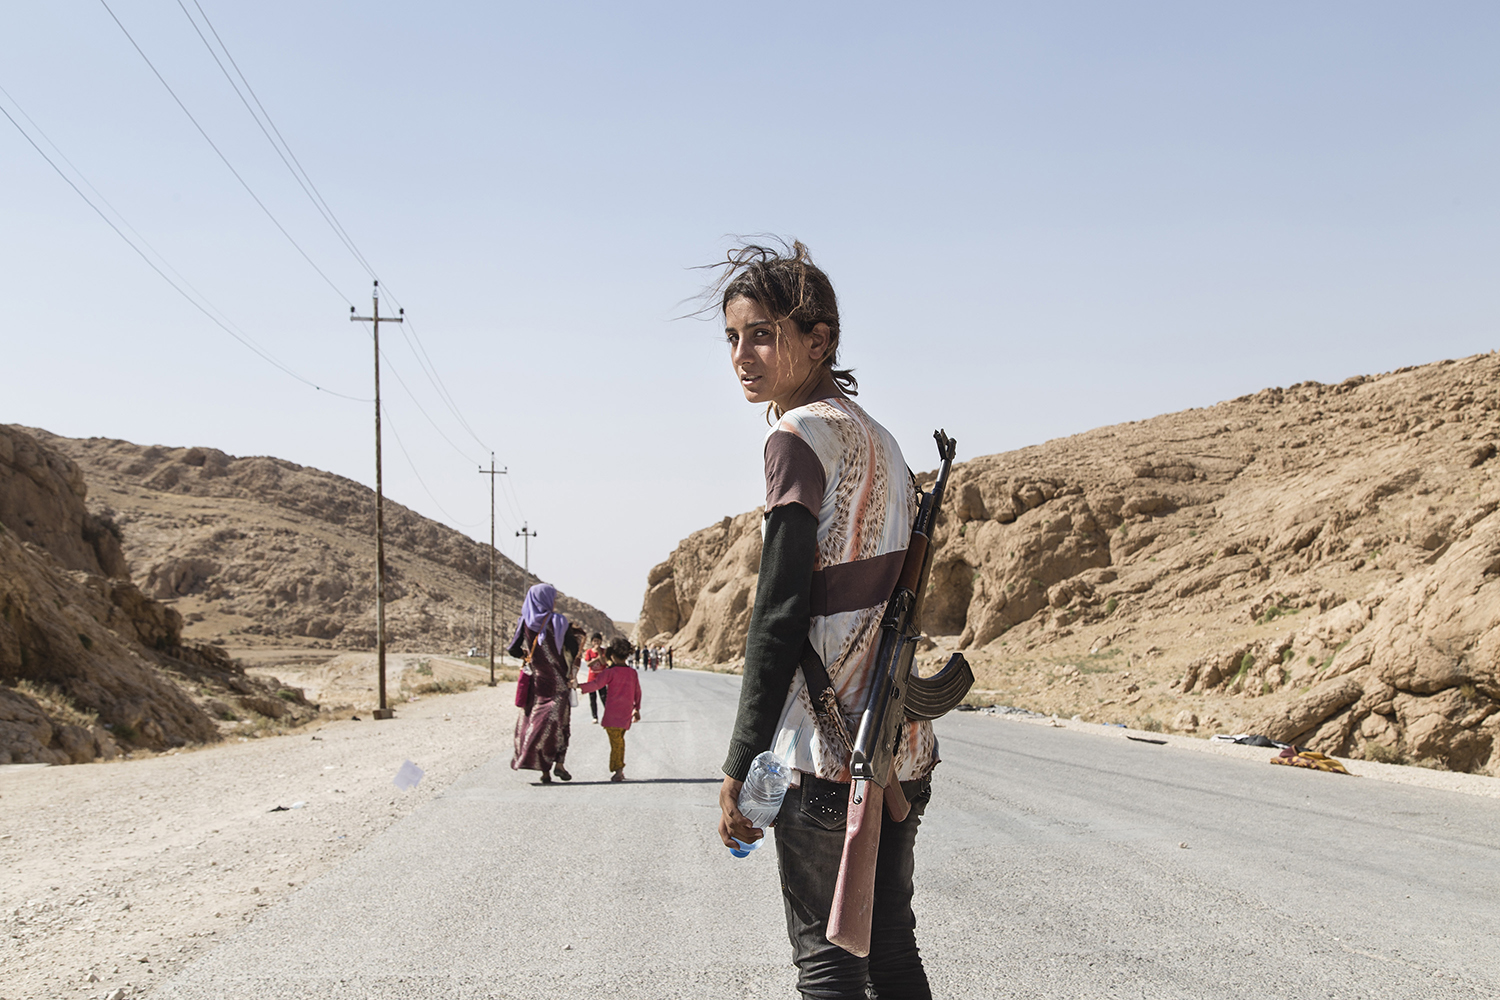 Runak,14, from Shengal, makes her way down the mountain after a week. August 2014. Sinjar Mountains, Iraq.